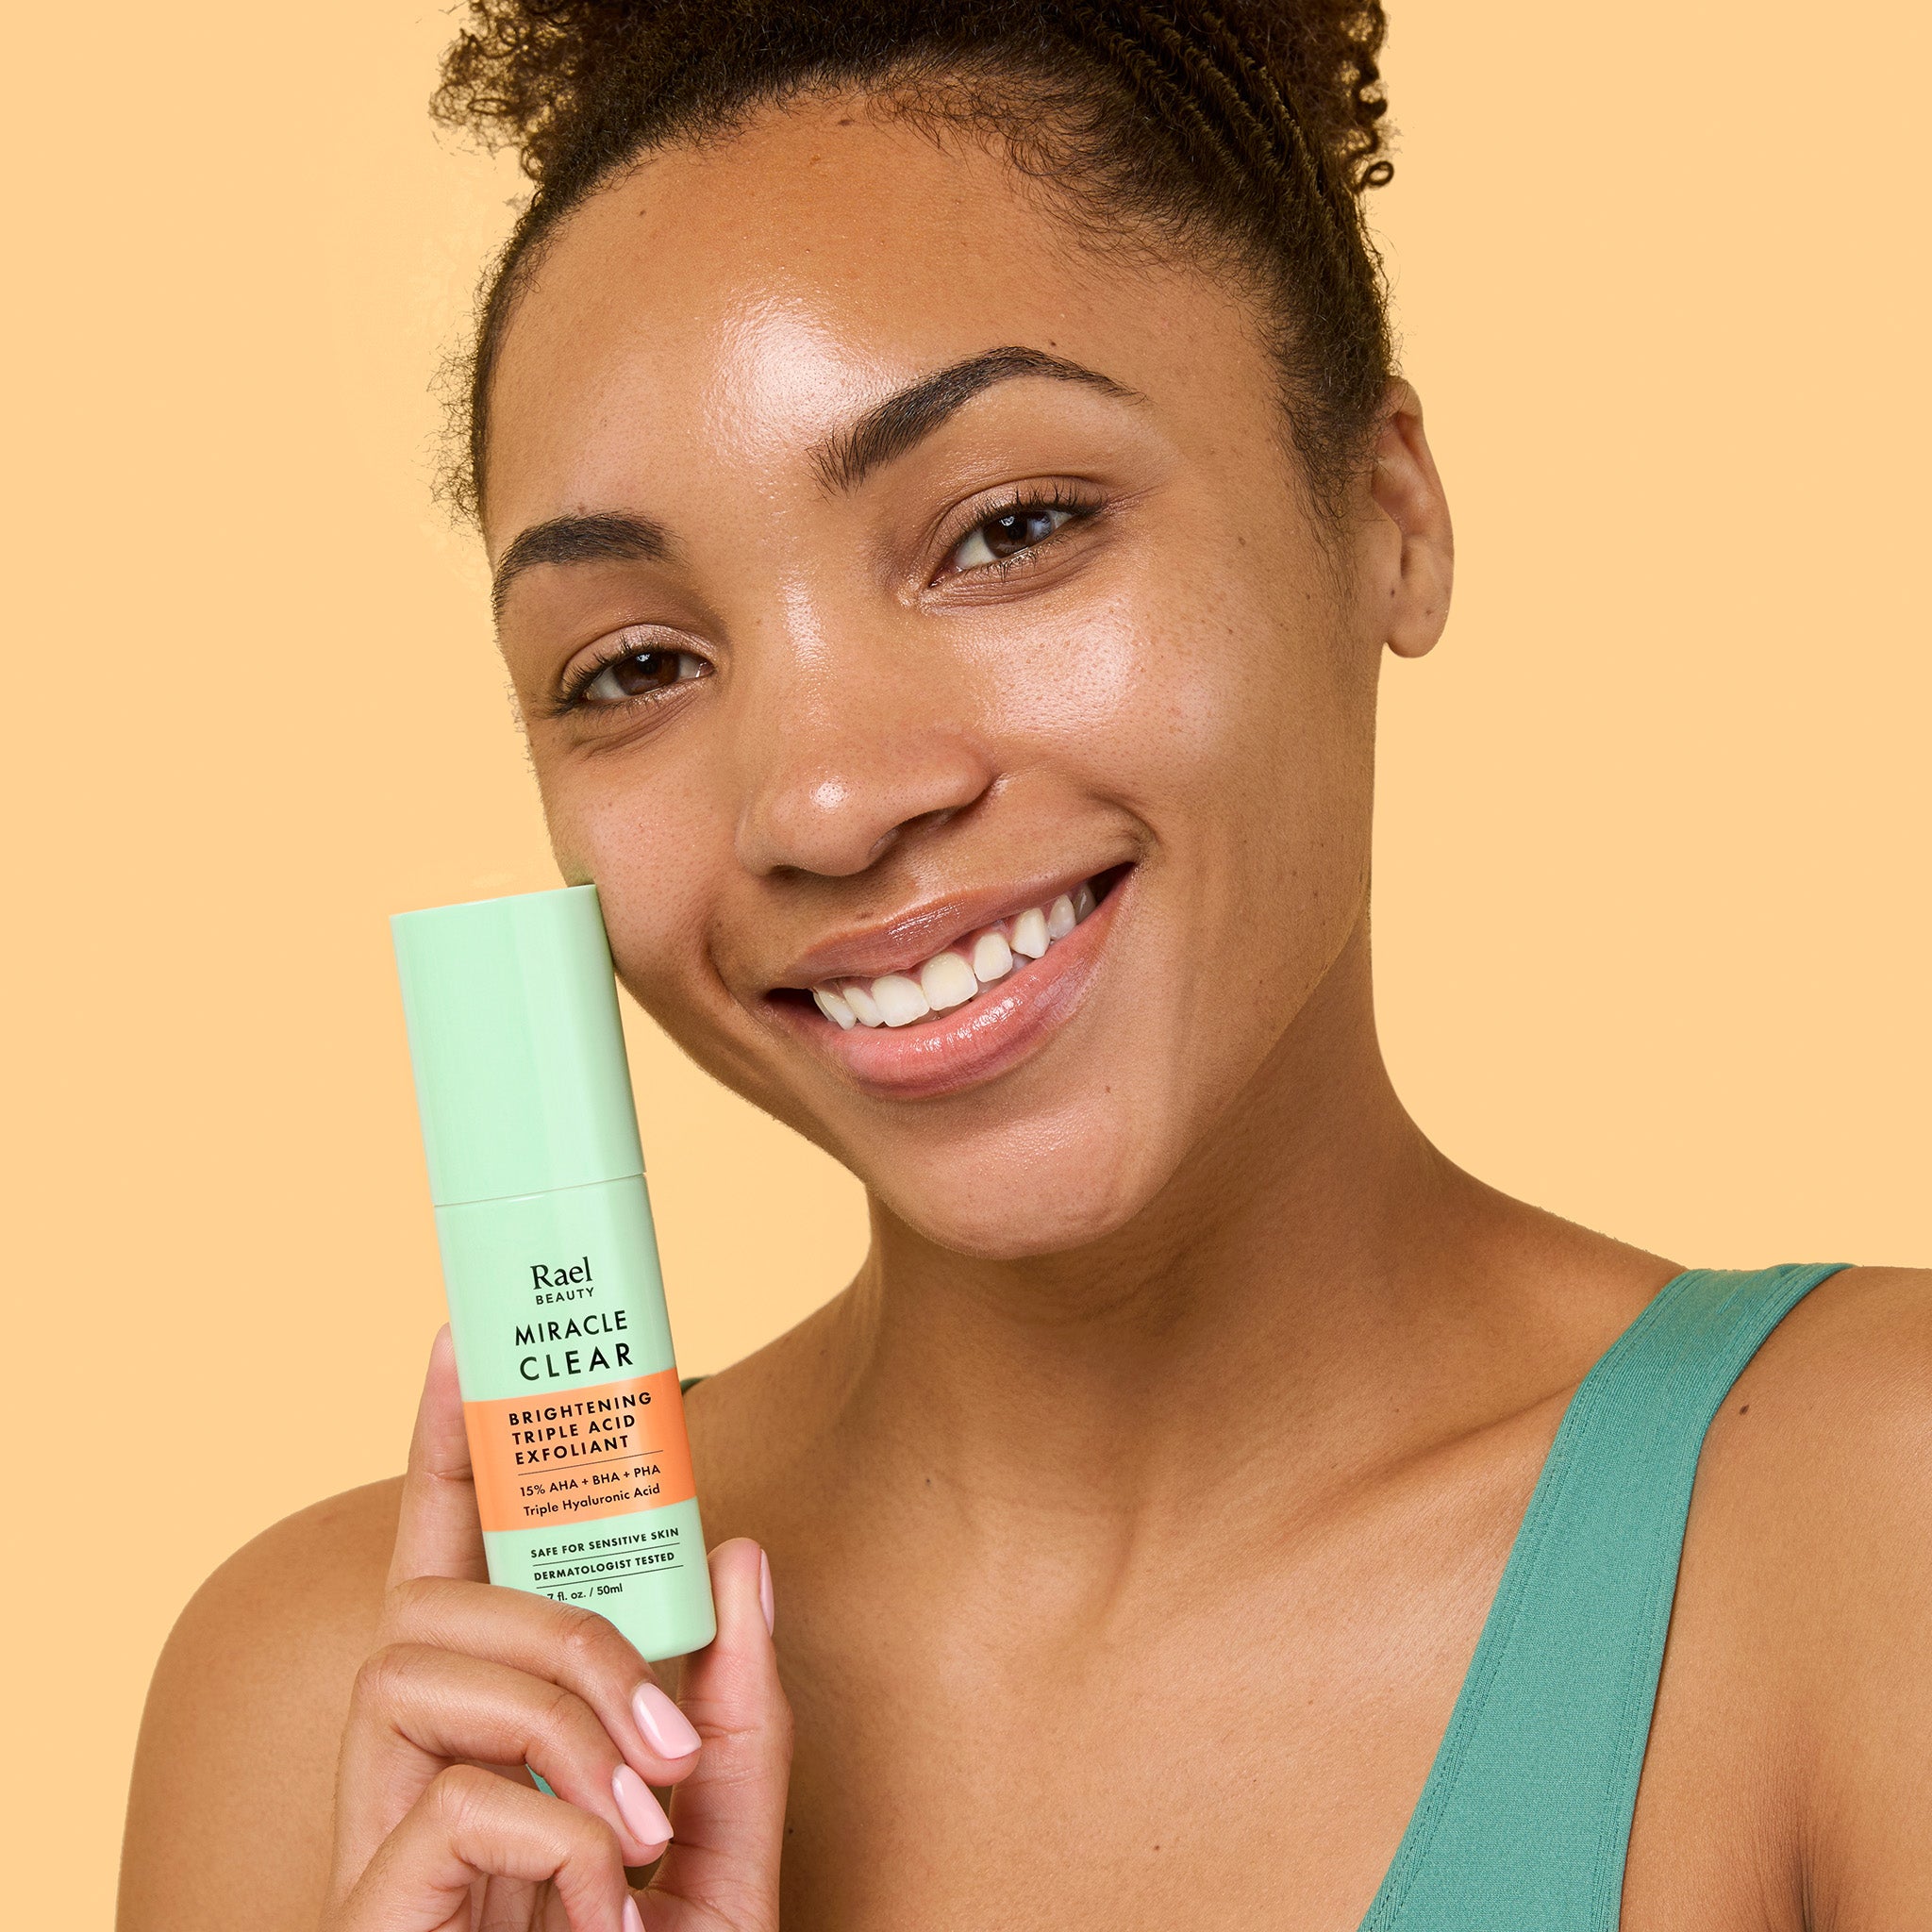 Girl holding a bottle of Brightening Liquid Exfoliator with Triple Acid Complex